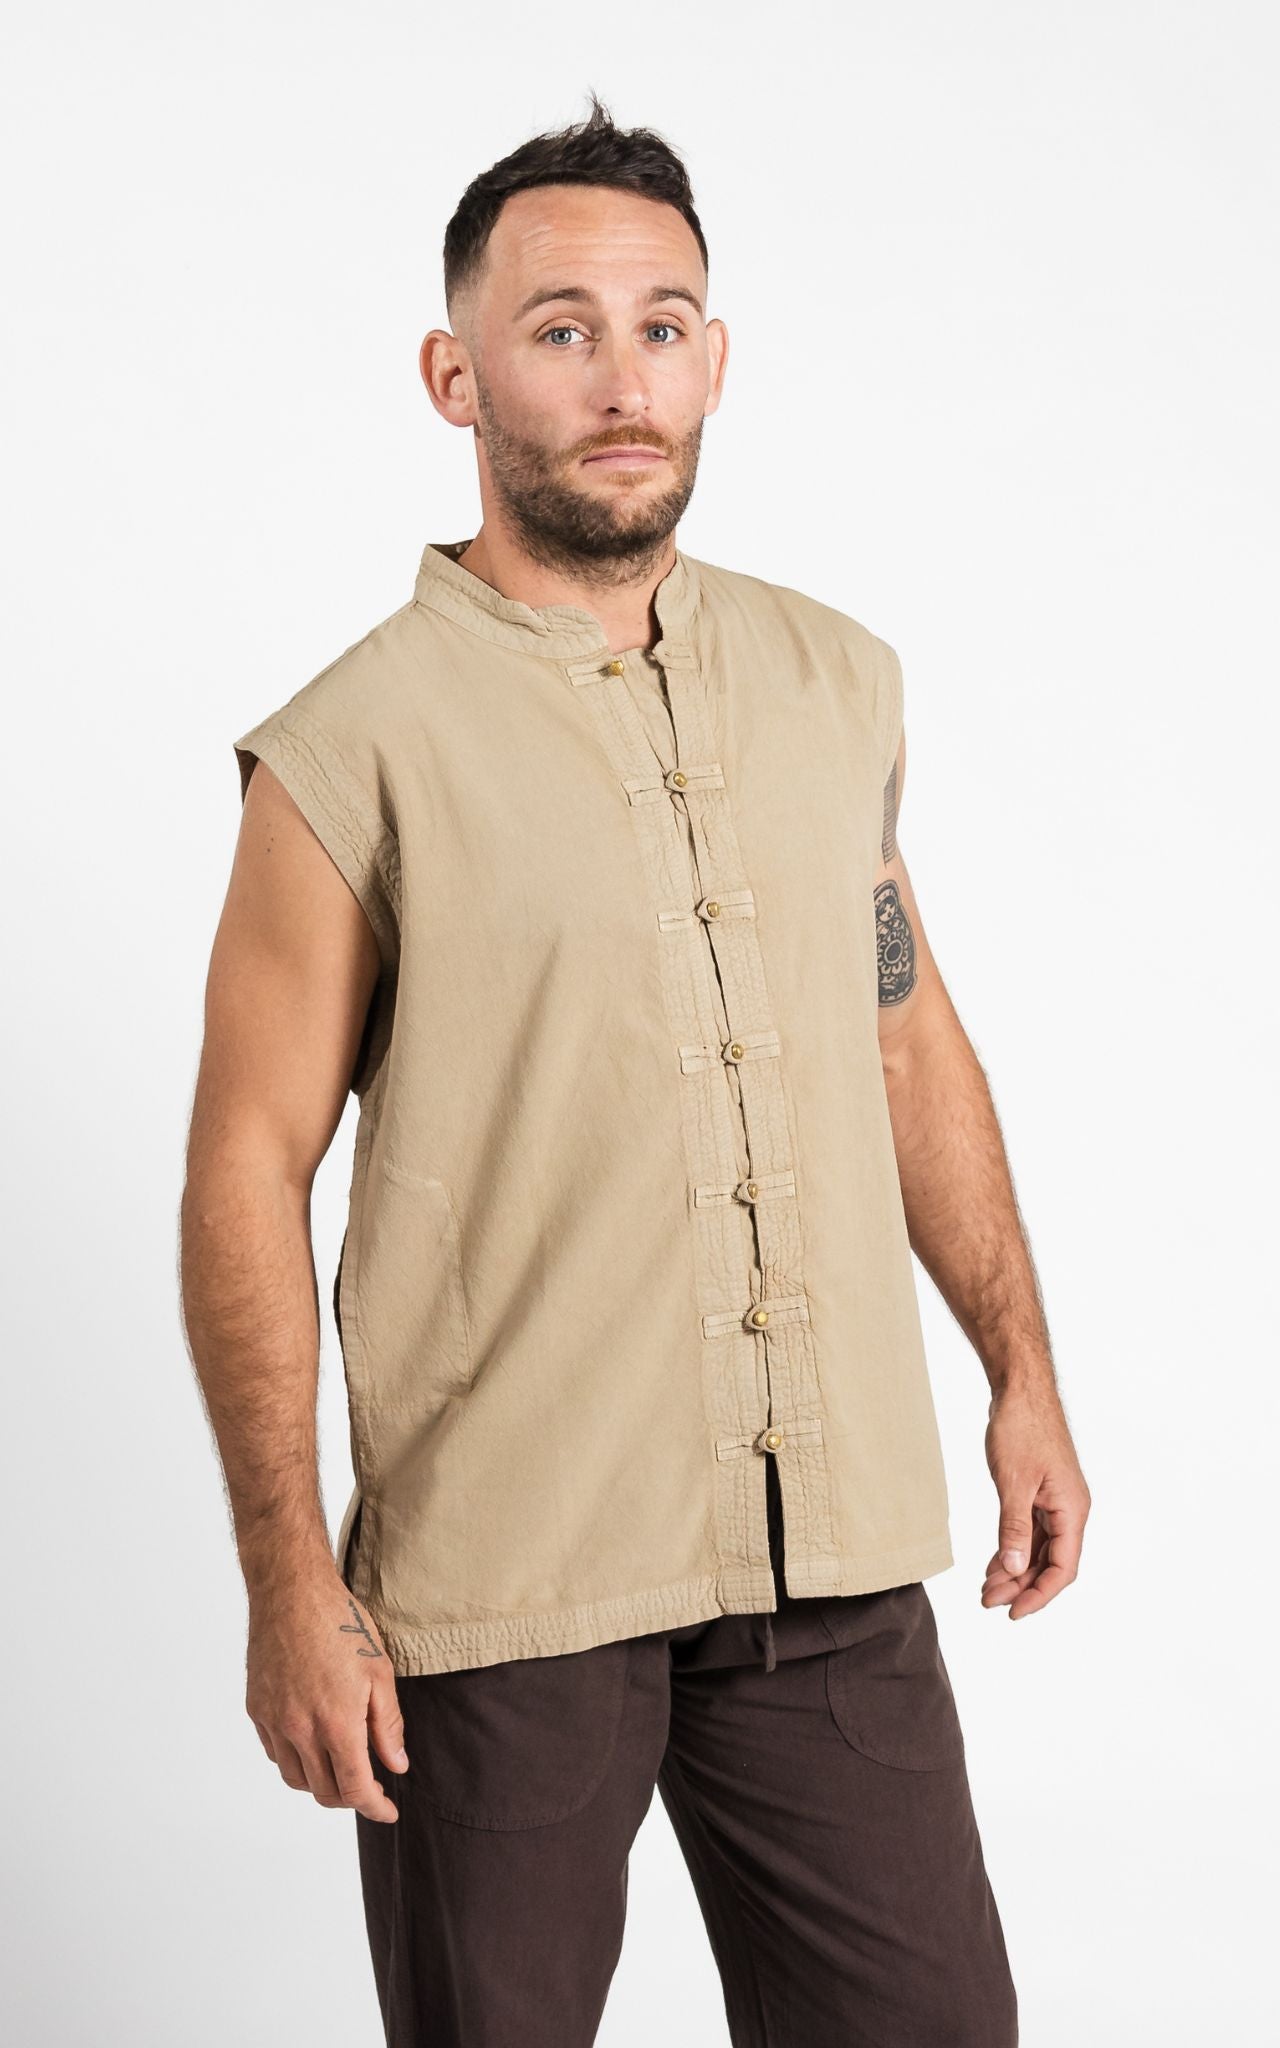 Surya Australia Ethical Cotton 'Lhasa' Shirt for men made in Nepal - Sand